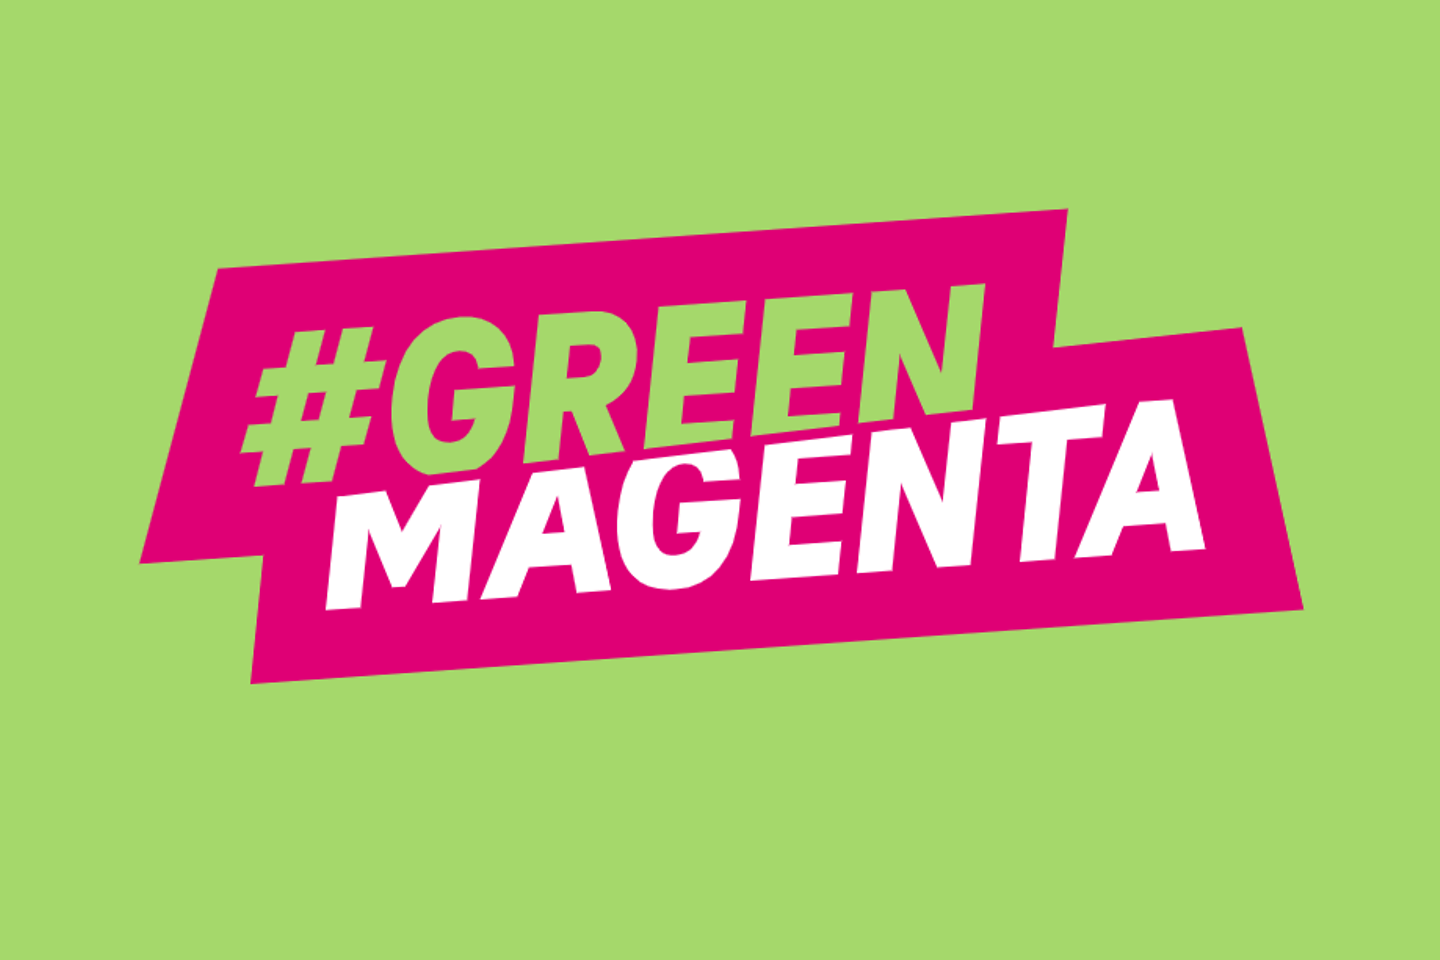 The logo for #Green Magenta on a green background.